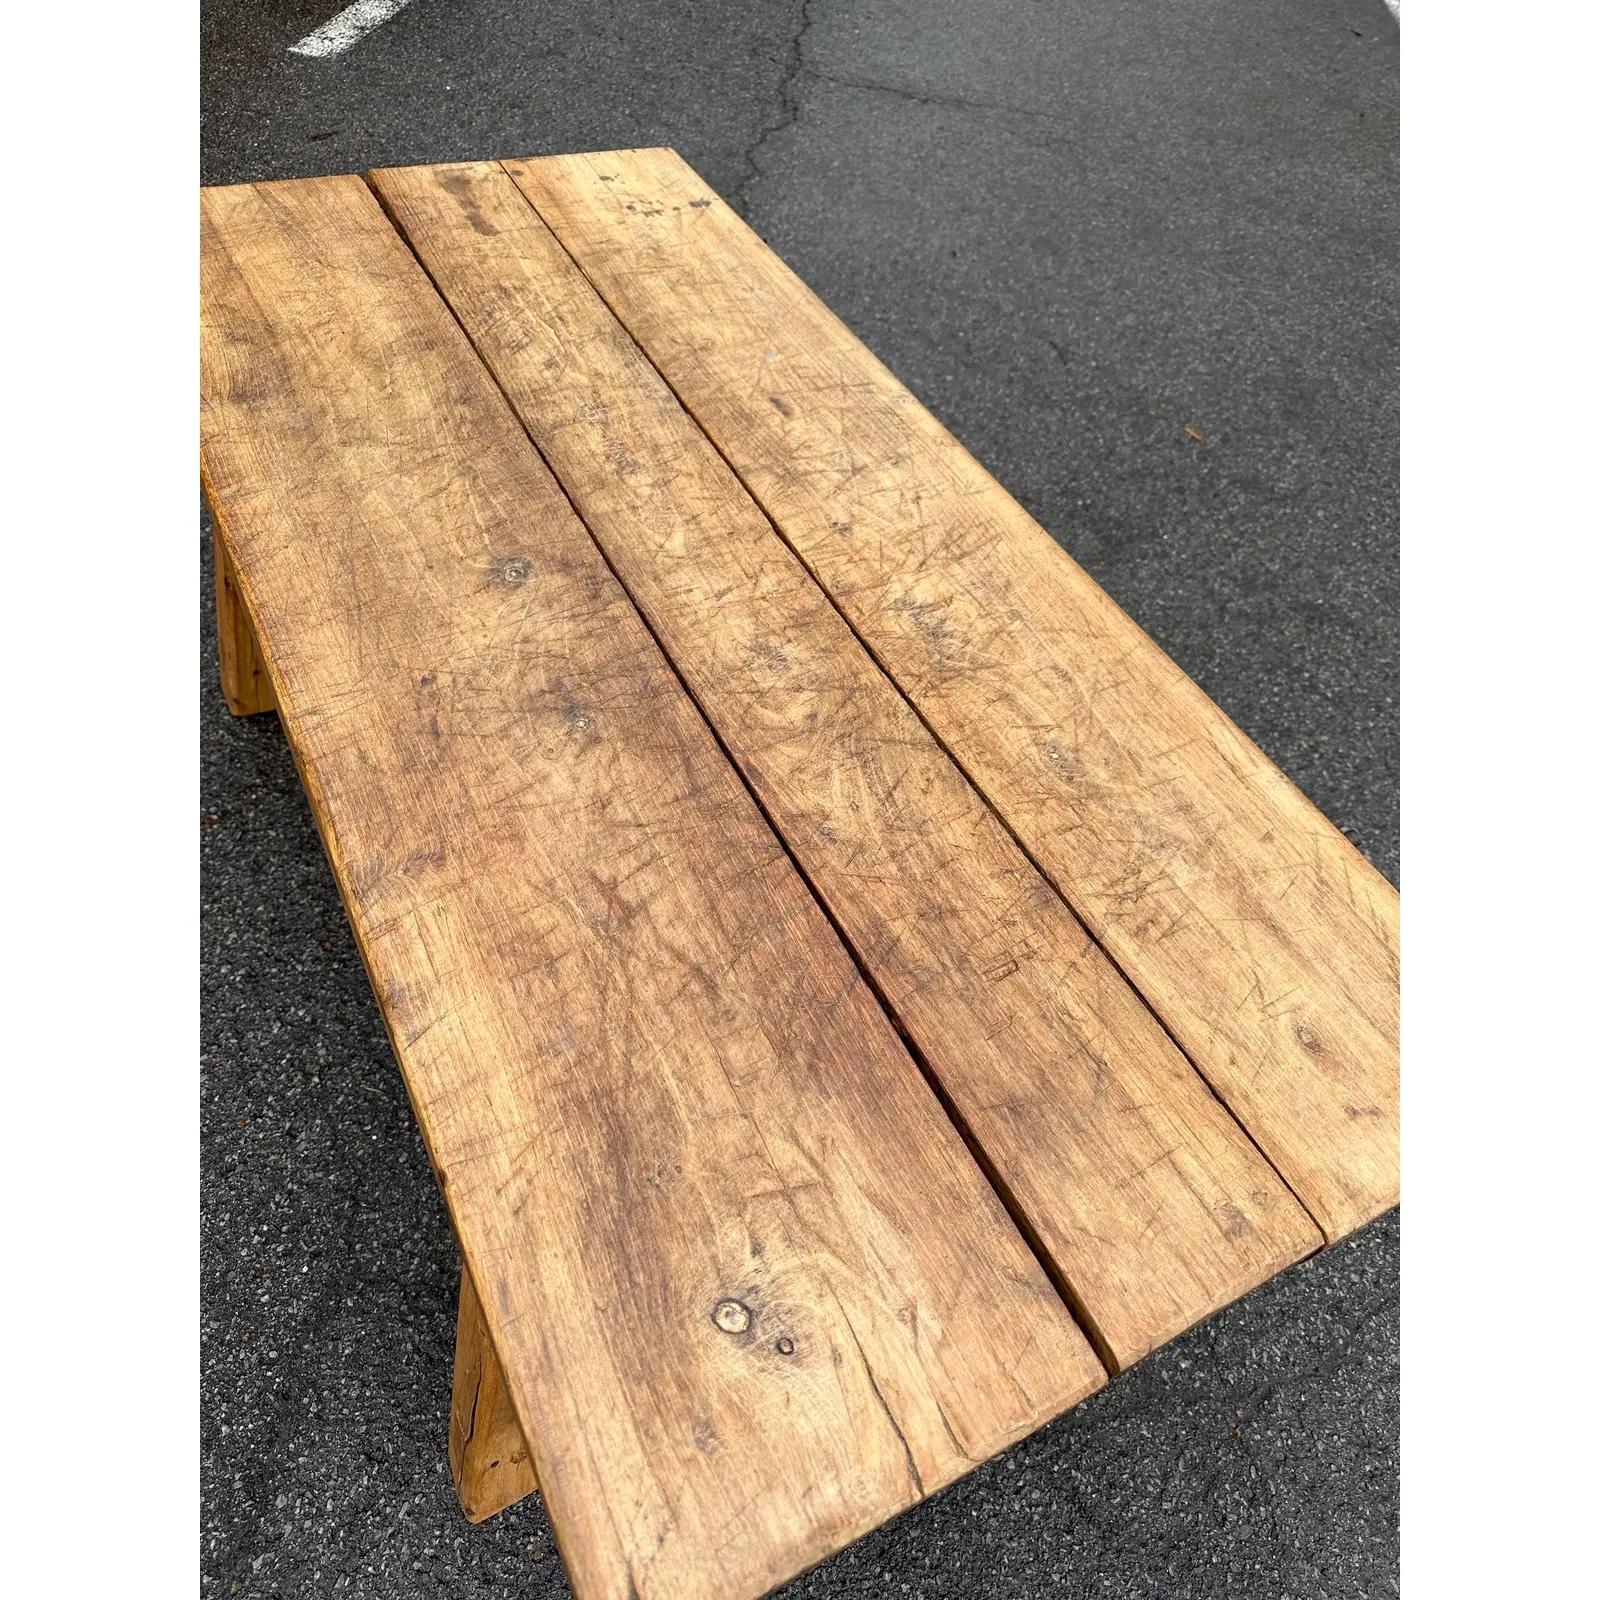 19th Century Antique Coffee Table In Good Condition For Sale In Nashville, TN